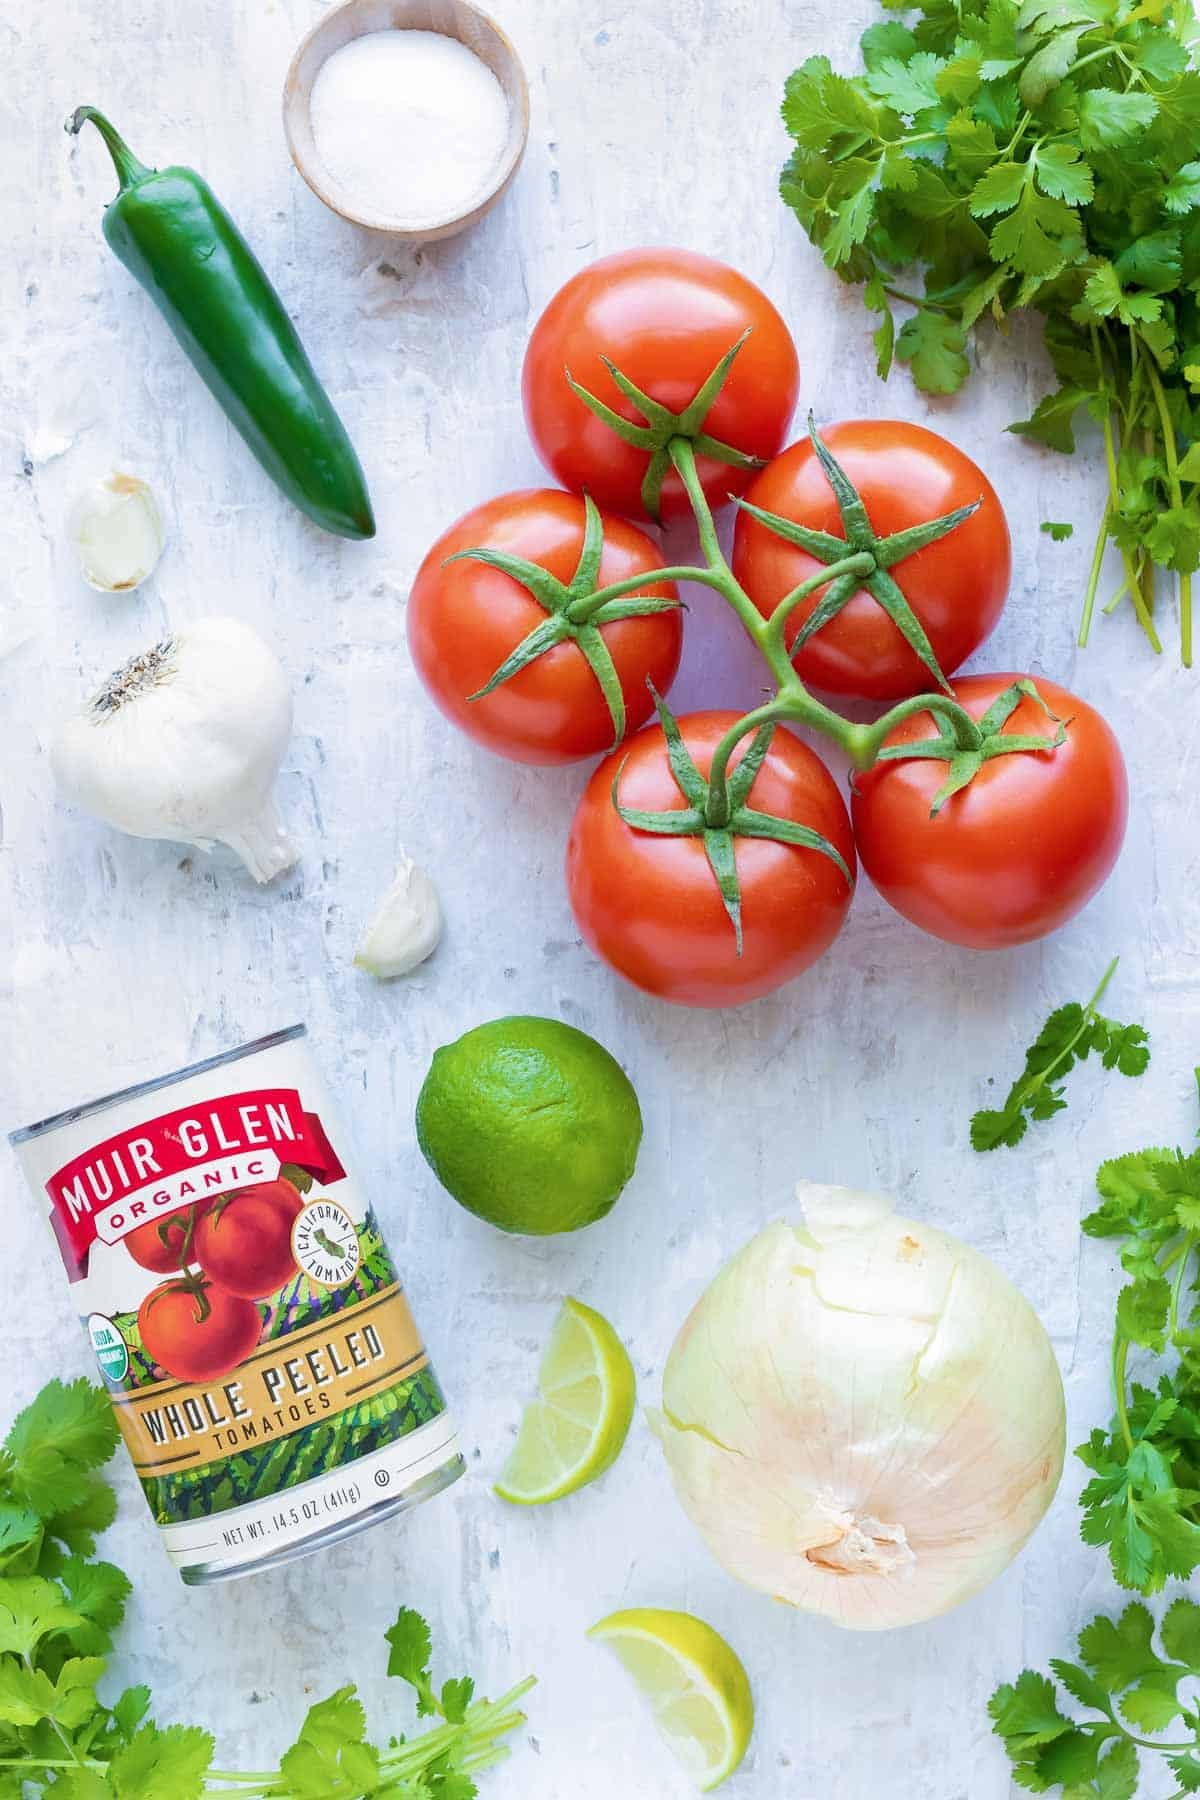 Tomatoes, onions, peppers, cilantro, lime, and garlic are the ingredients for this salsa.